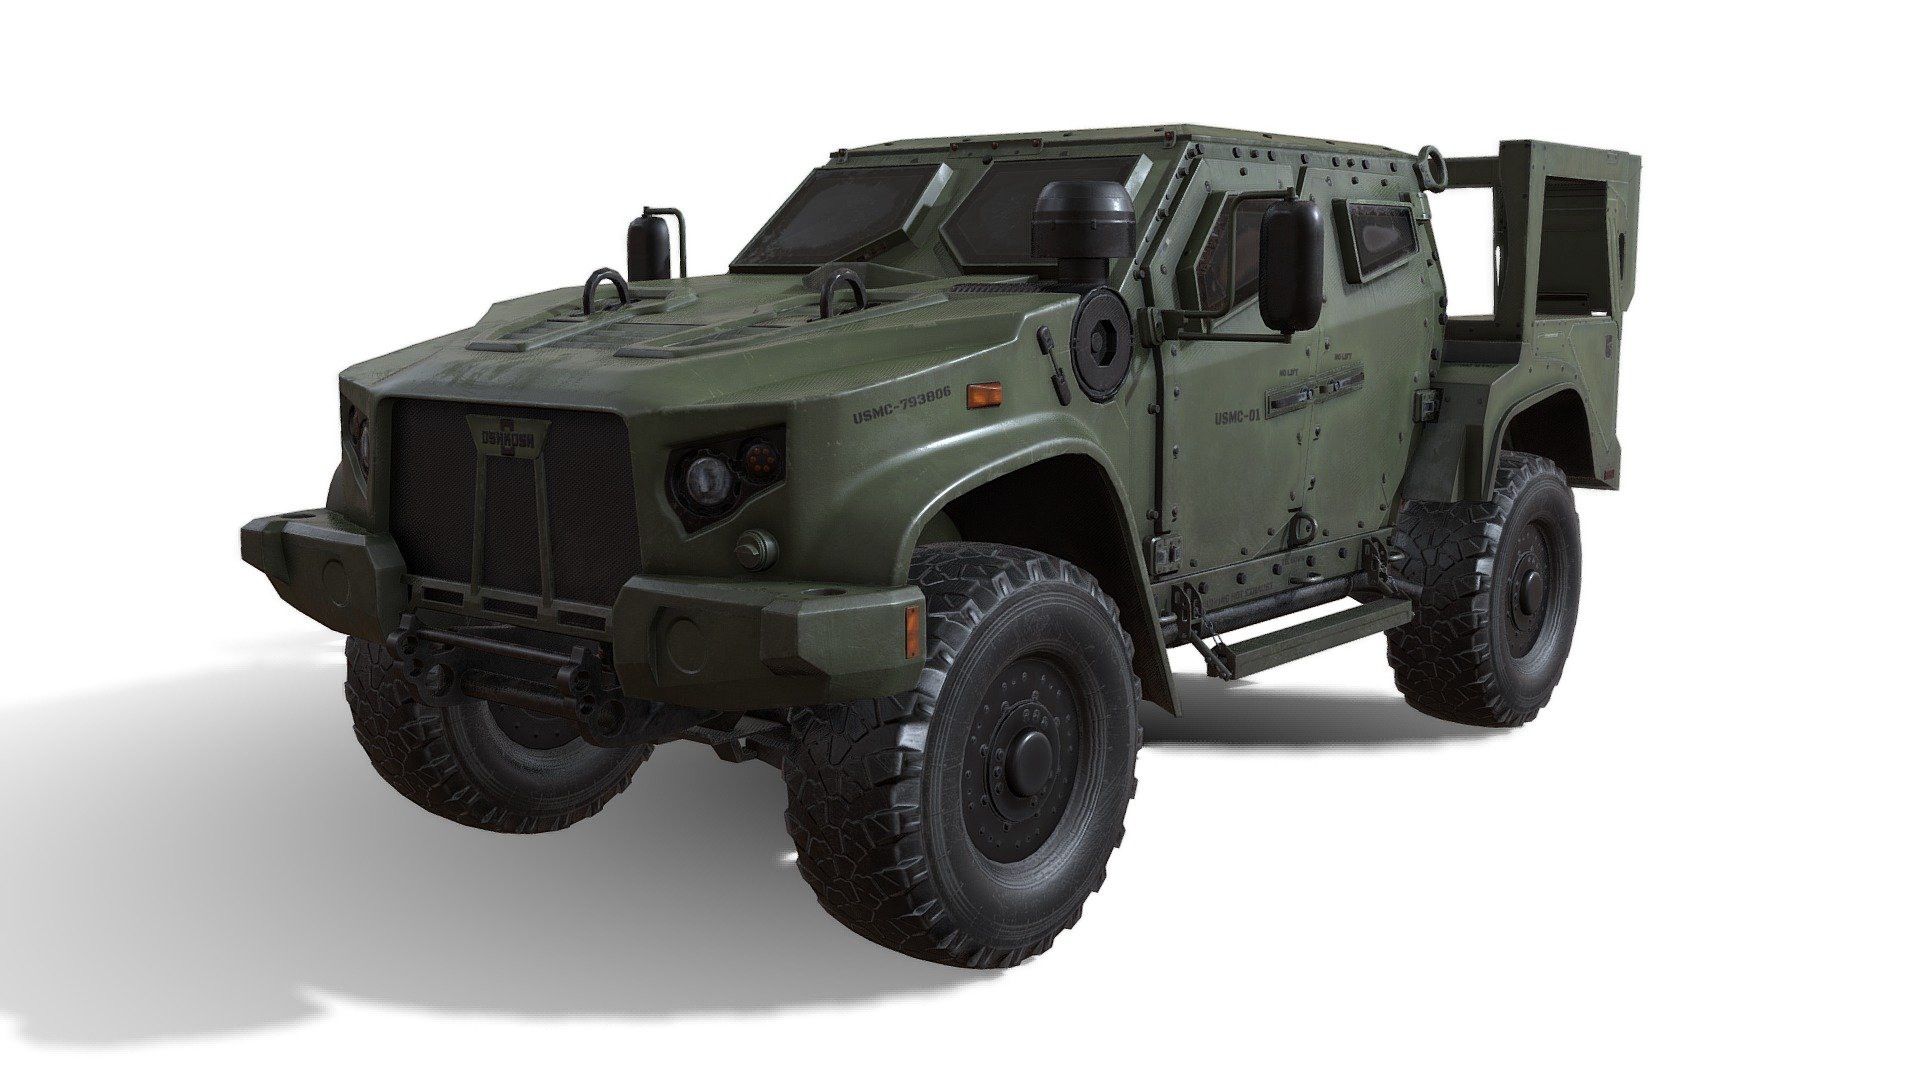 low poly 3d models of US military vehicle Oshkosh JLTV

INCLUDE: Sand Camo, Wood Camo

NO INTERIOR

Polycount:




Tris: 56 942

Texture sets:




4096x4096 (Front-body)

4096x4096 (Back-body)

1024x1024 (wheels)
 - Oshkosh JLTV - Buy Royalty Free 3D model by Vlad model's (@a3flife) 3d model